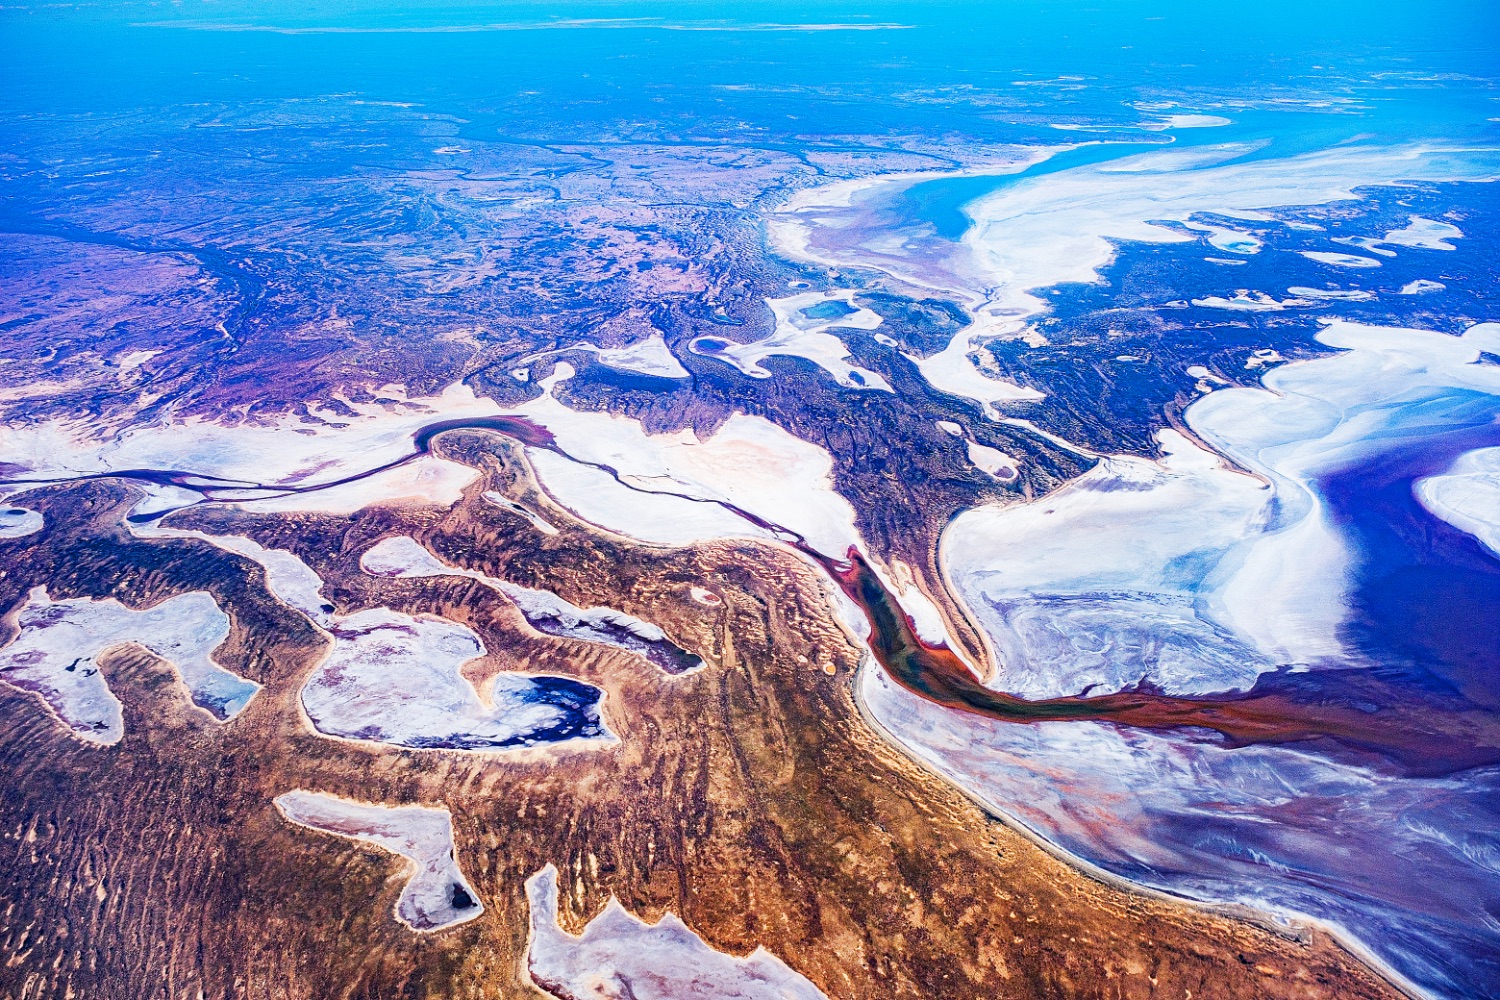 Aerial view of the Australian Outback